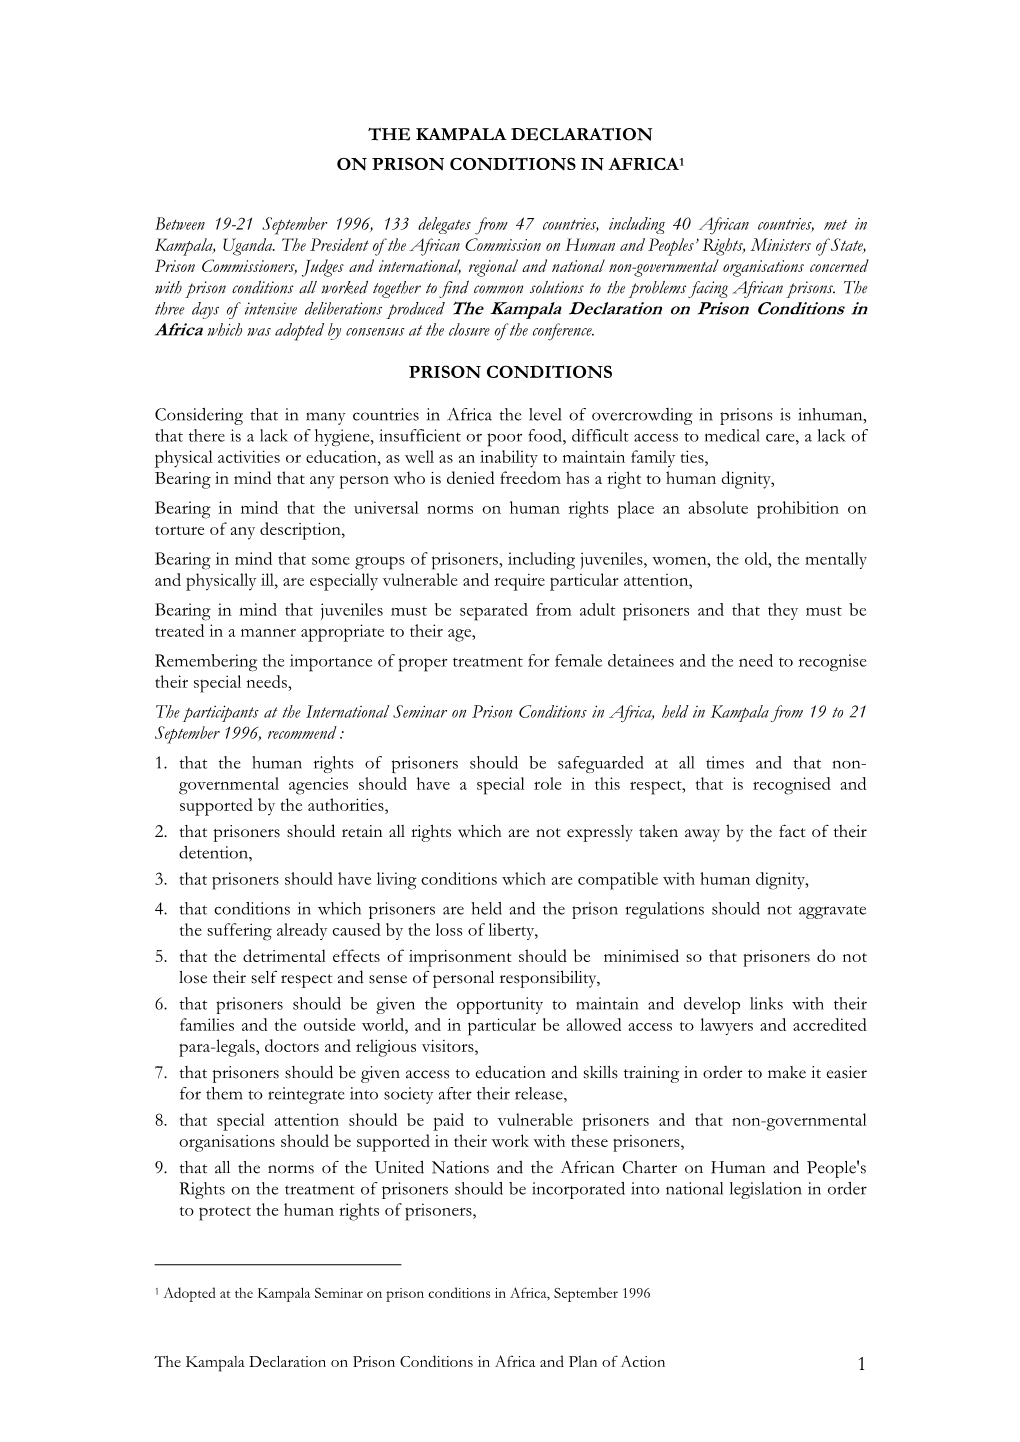 The Kampala Declaration on Prison Conditions in Africa1